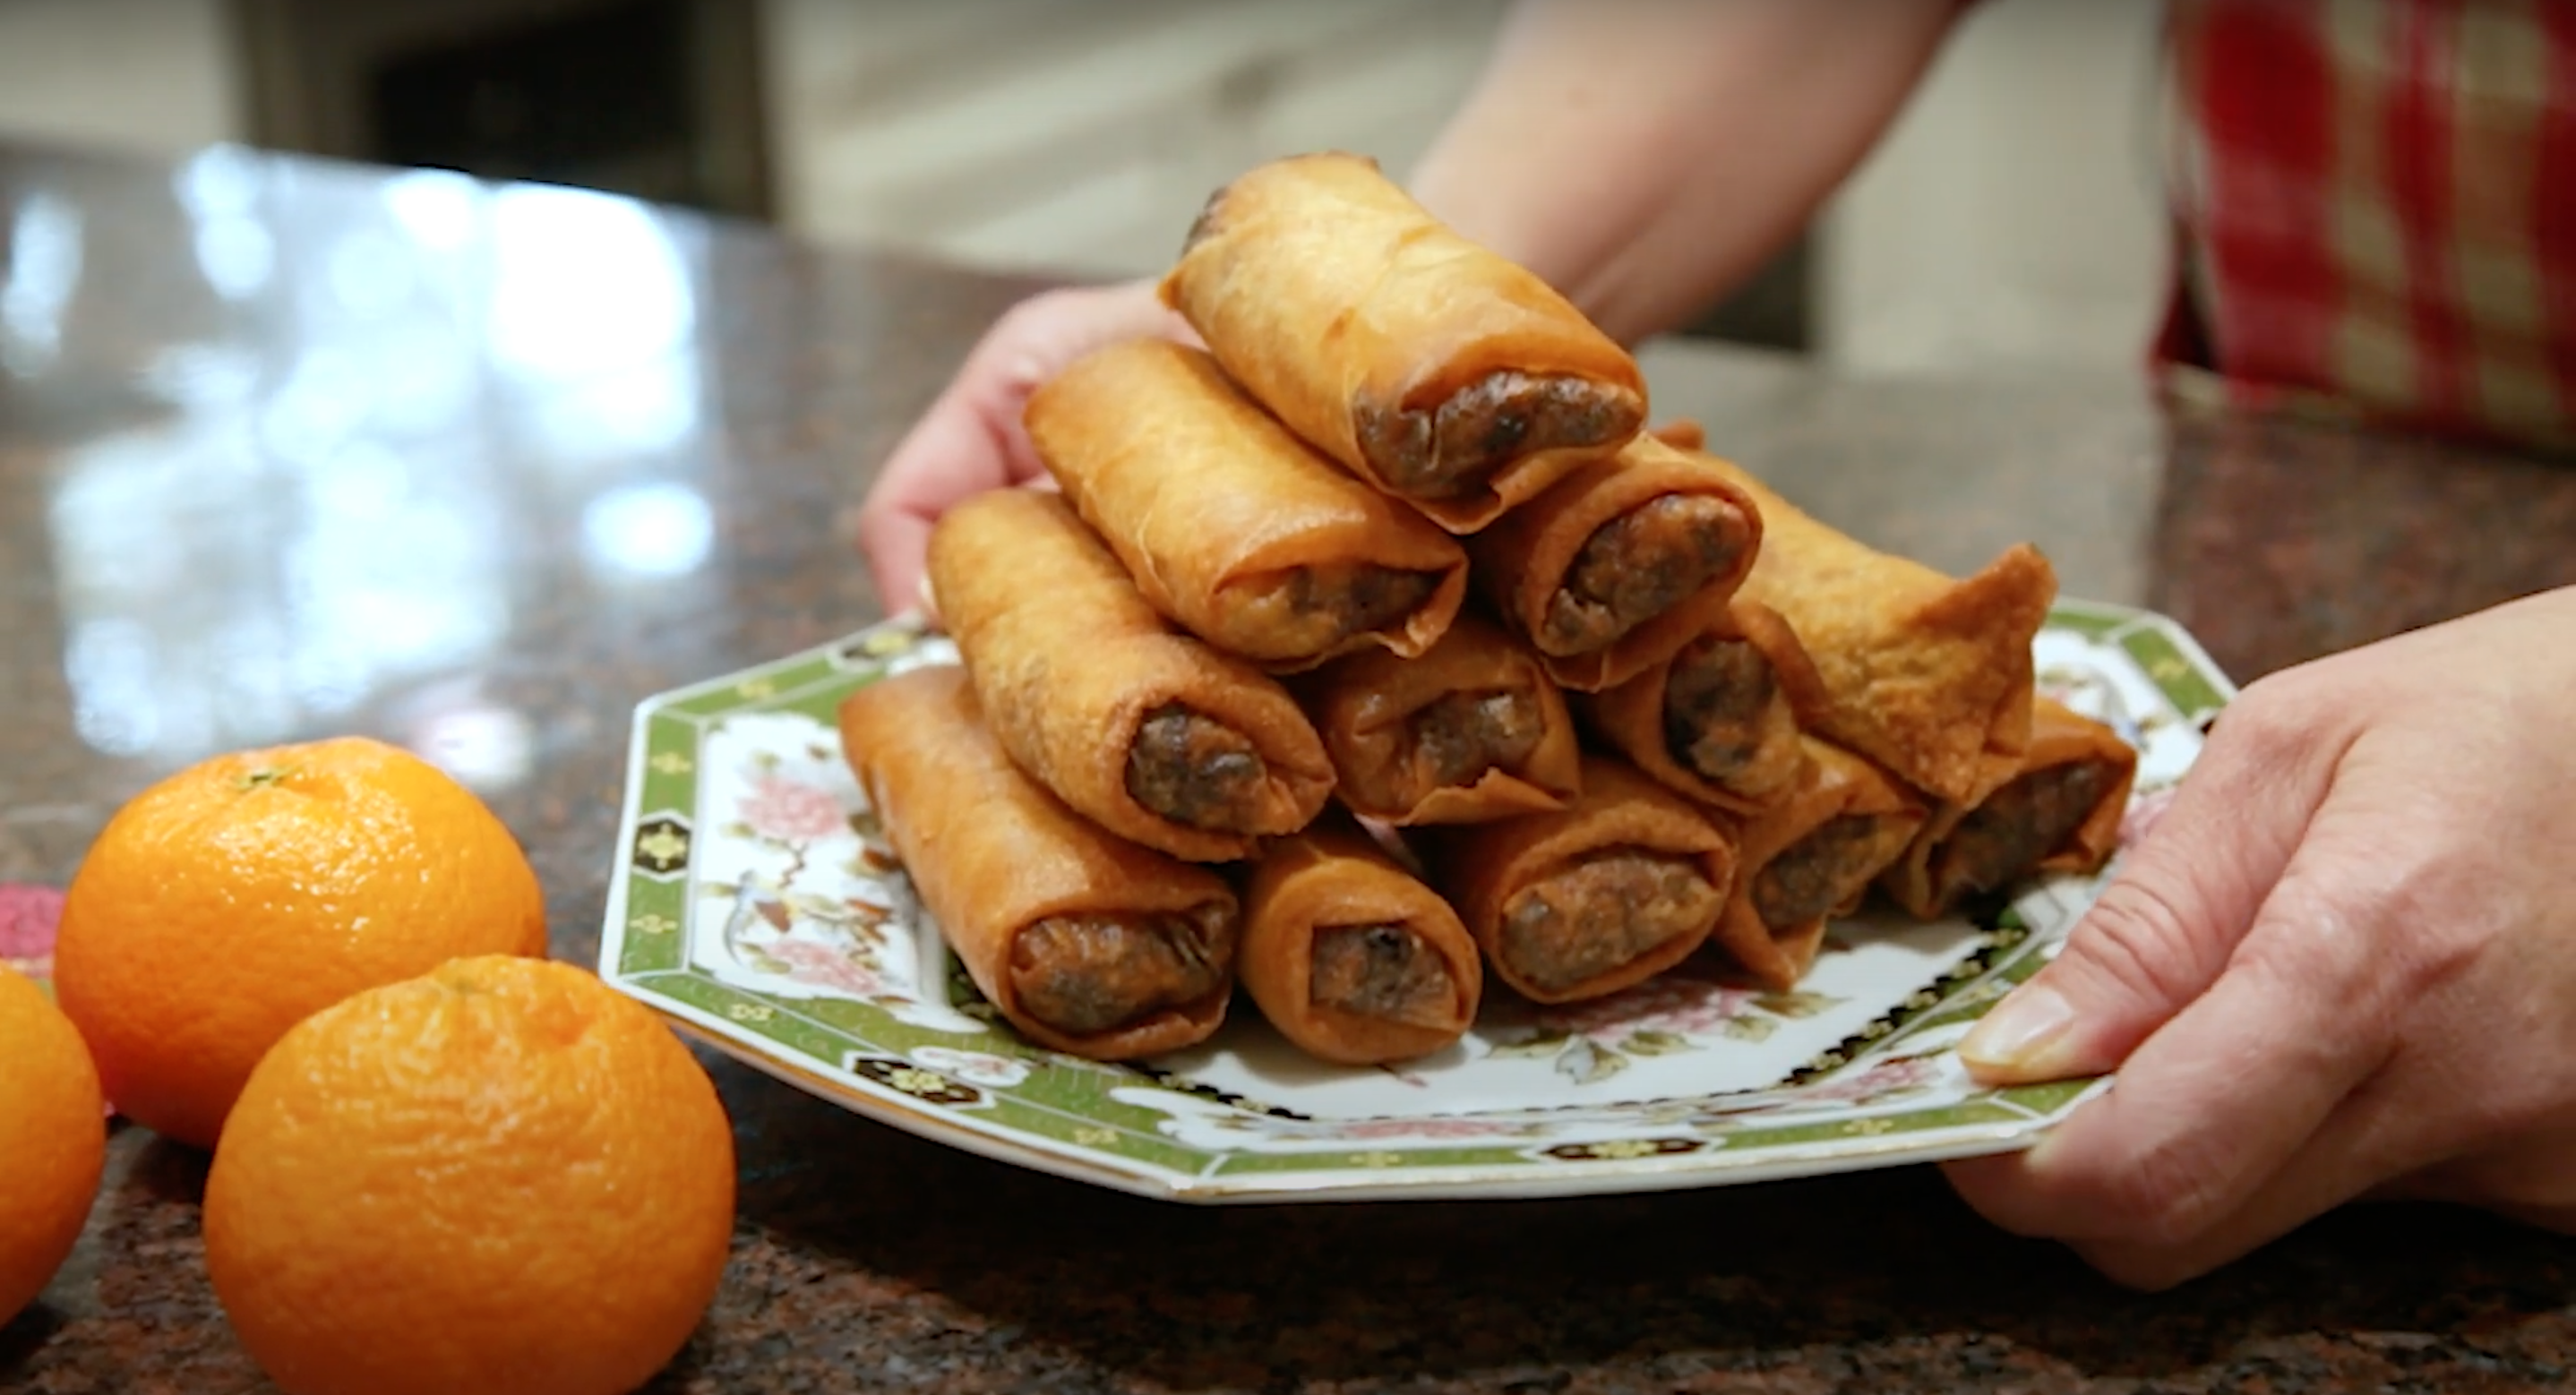 How to Wrap Spring Rolls: Both Chinese & Vietnamese! - The Woks of